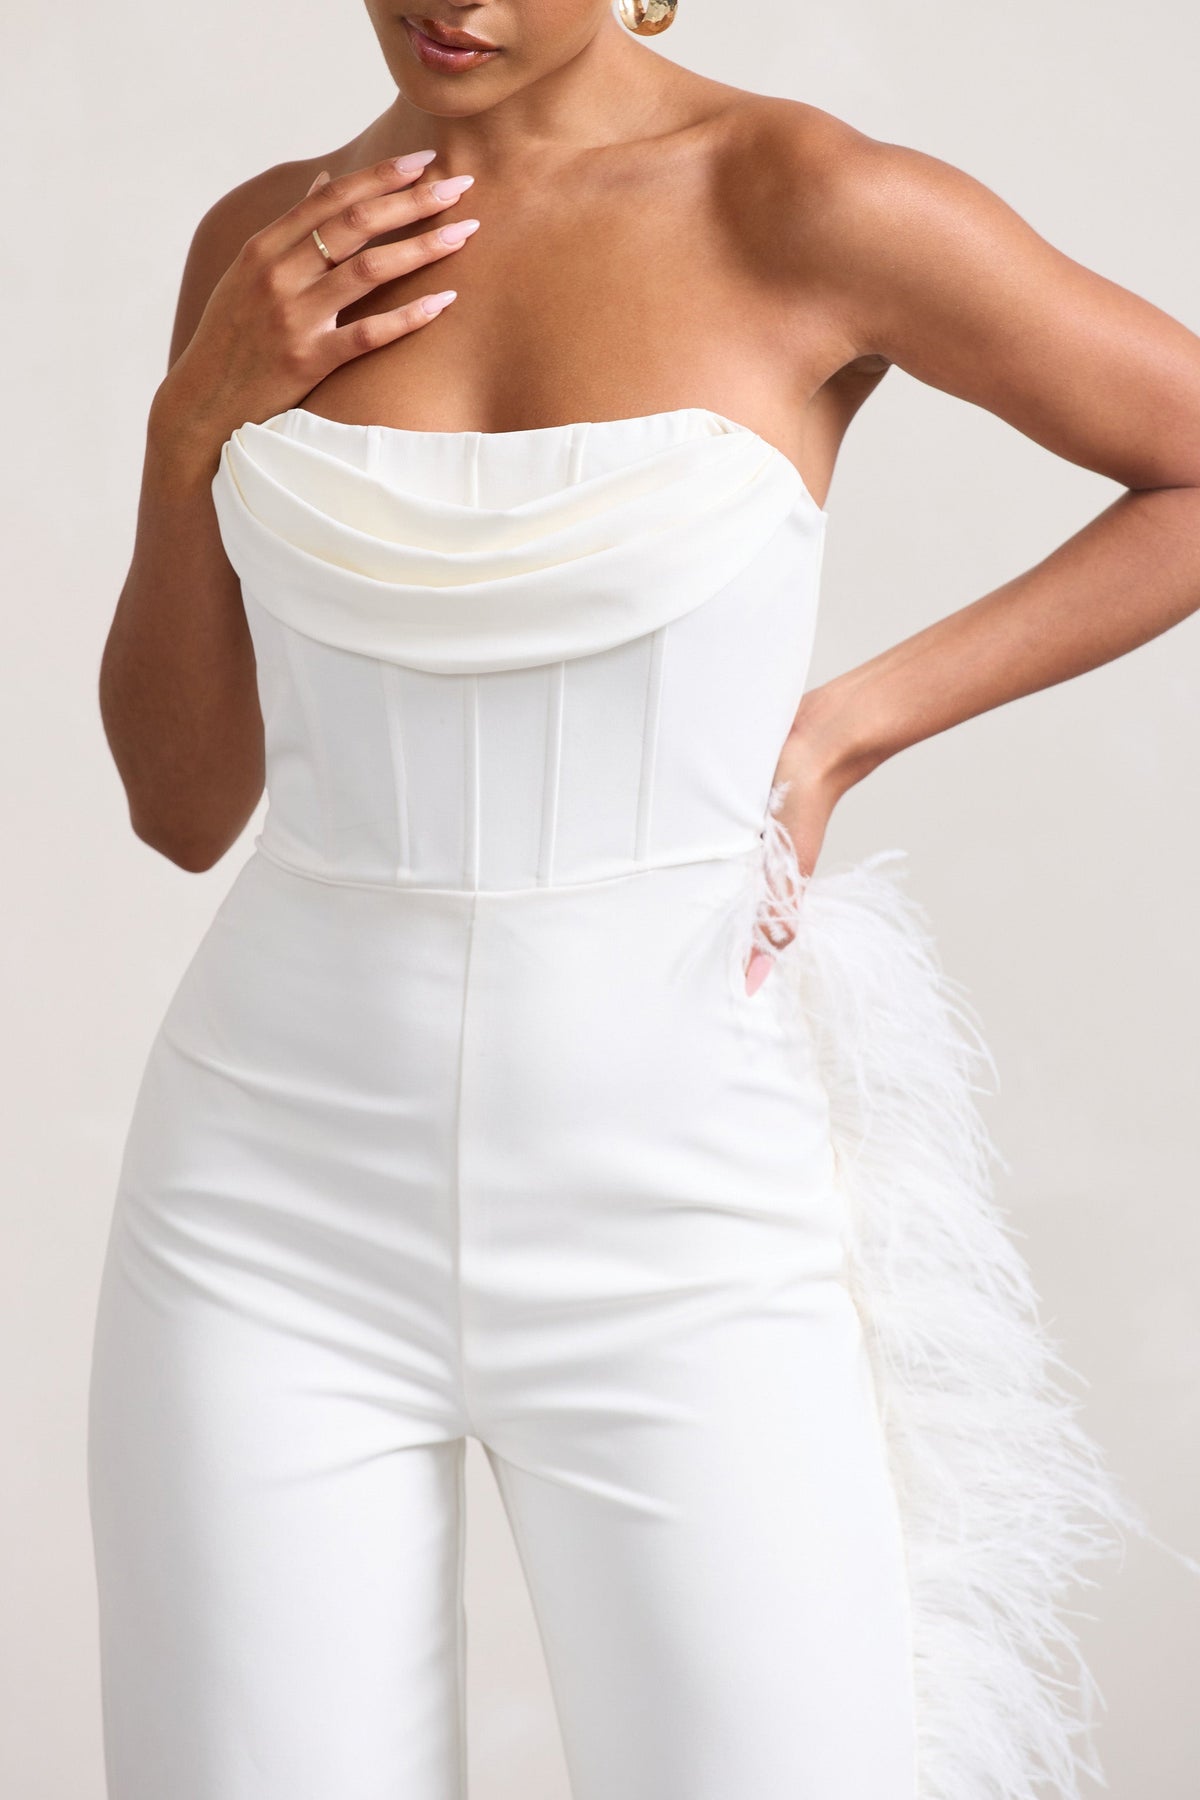 All About You White Feather Bandeau Corset Top – Club L London - USA